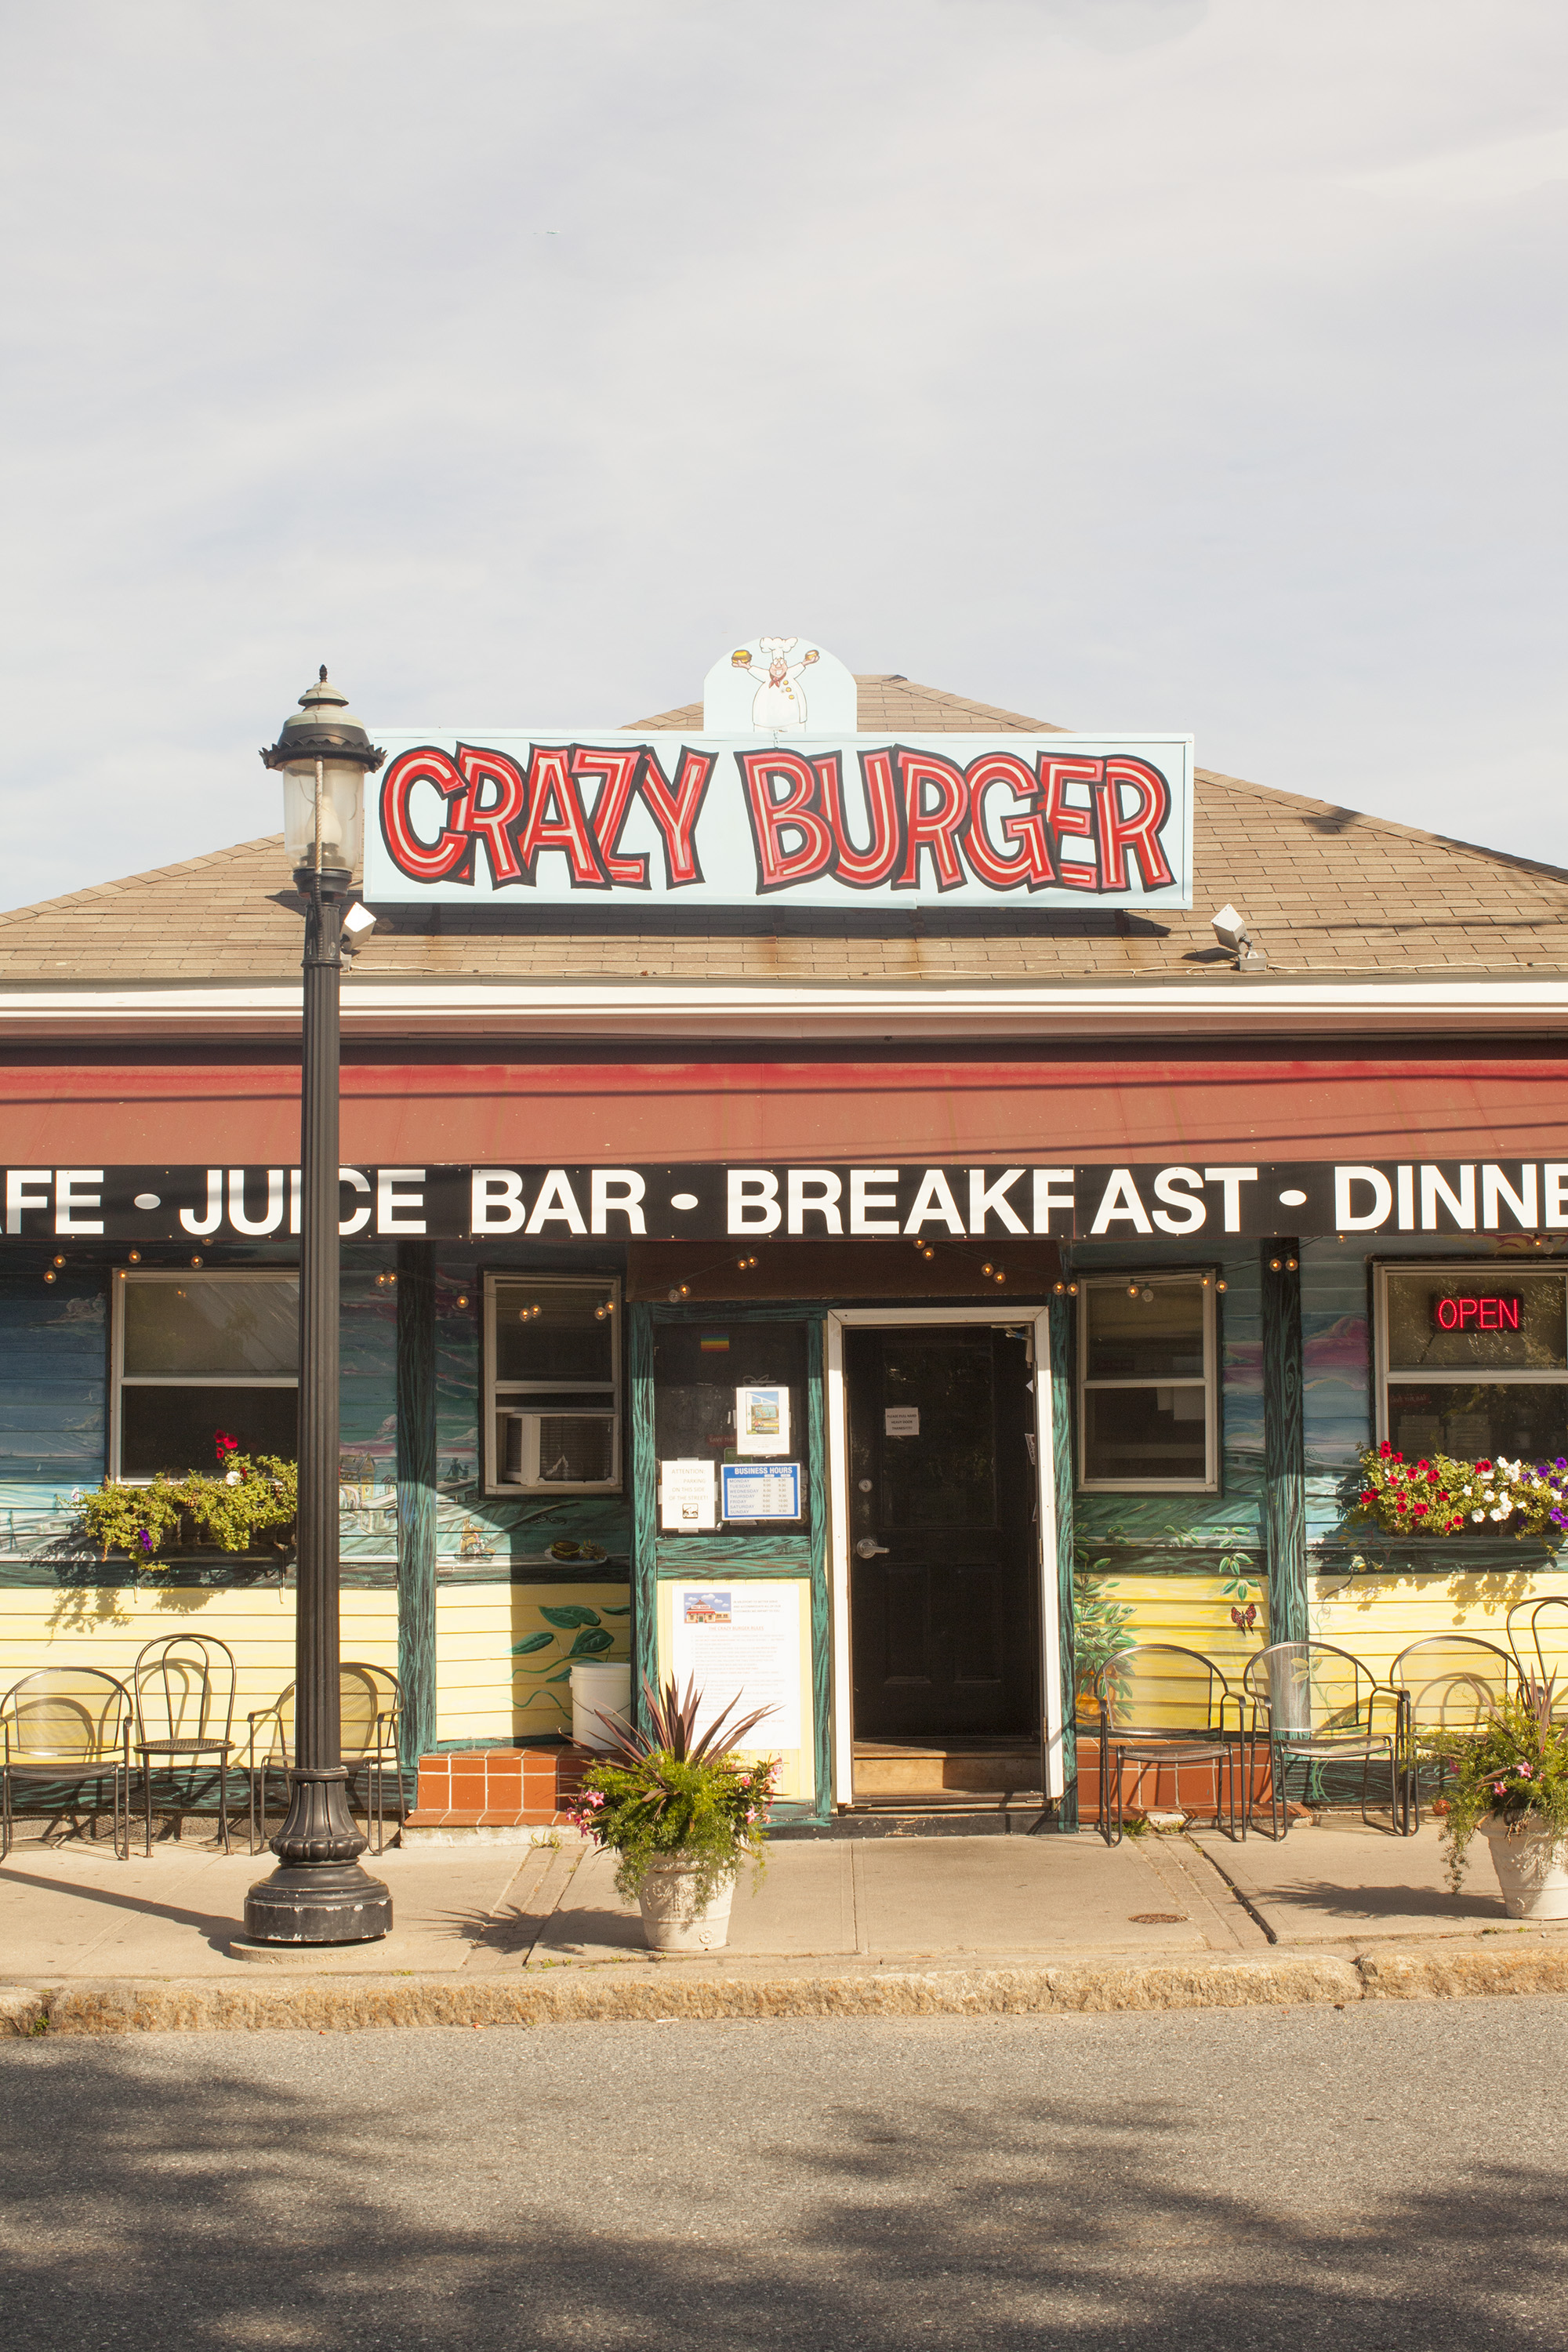 Crazy Burger has a burger menu to please both carnivores and vegetarians including their famous salmon burger praised by Food Network's Guy Fieri on an episode of Diners, Drive-ins and Dives. 